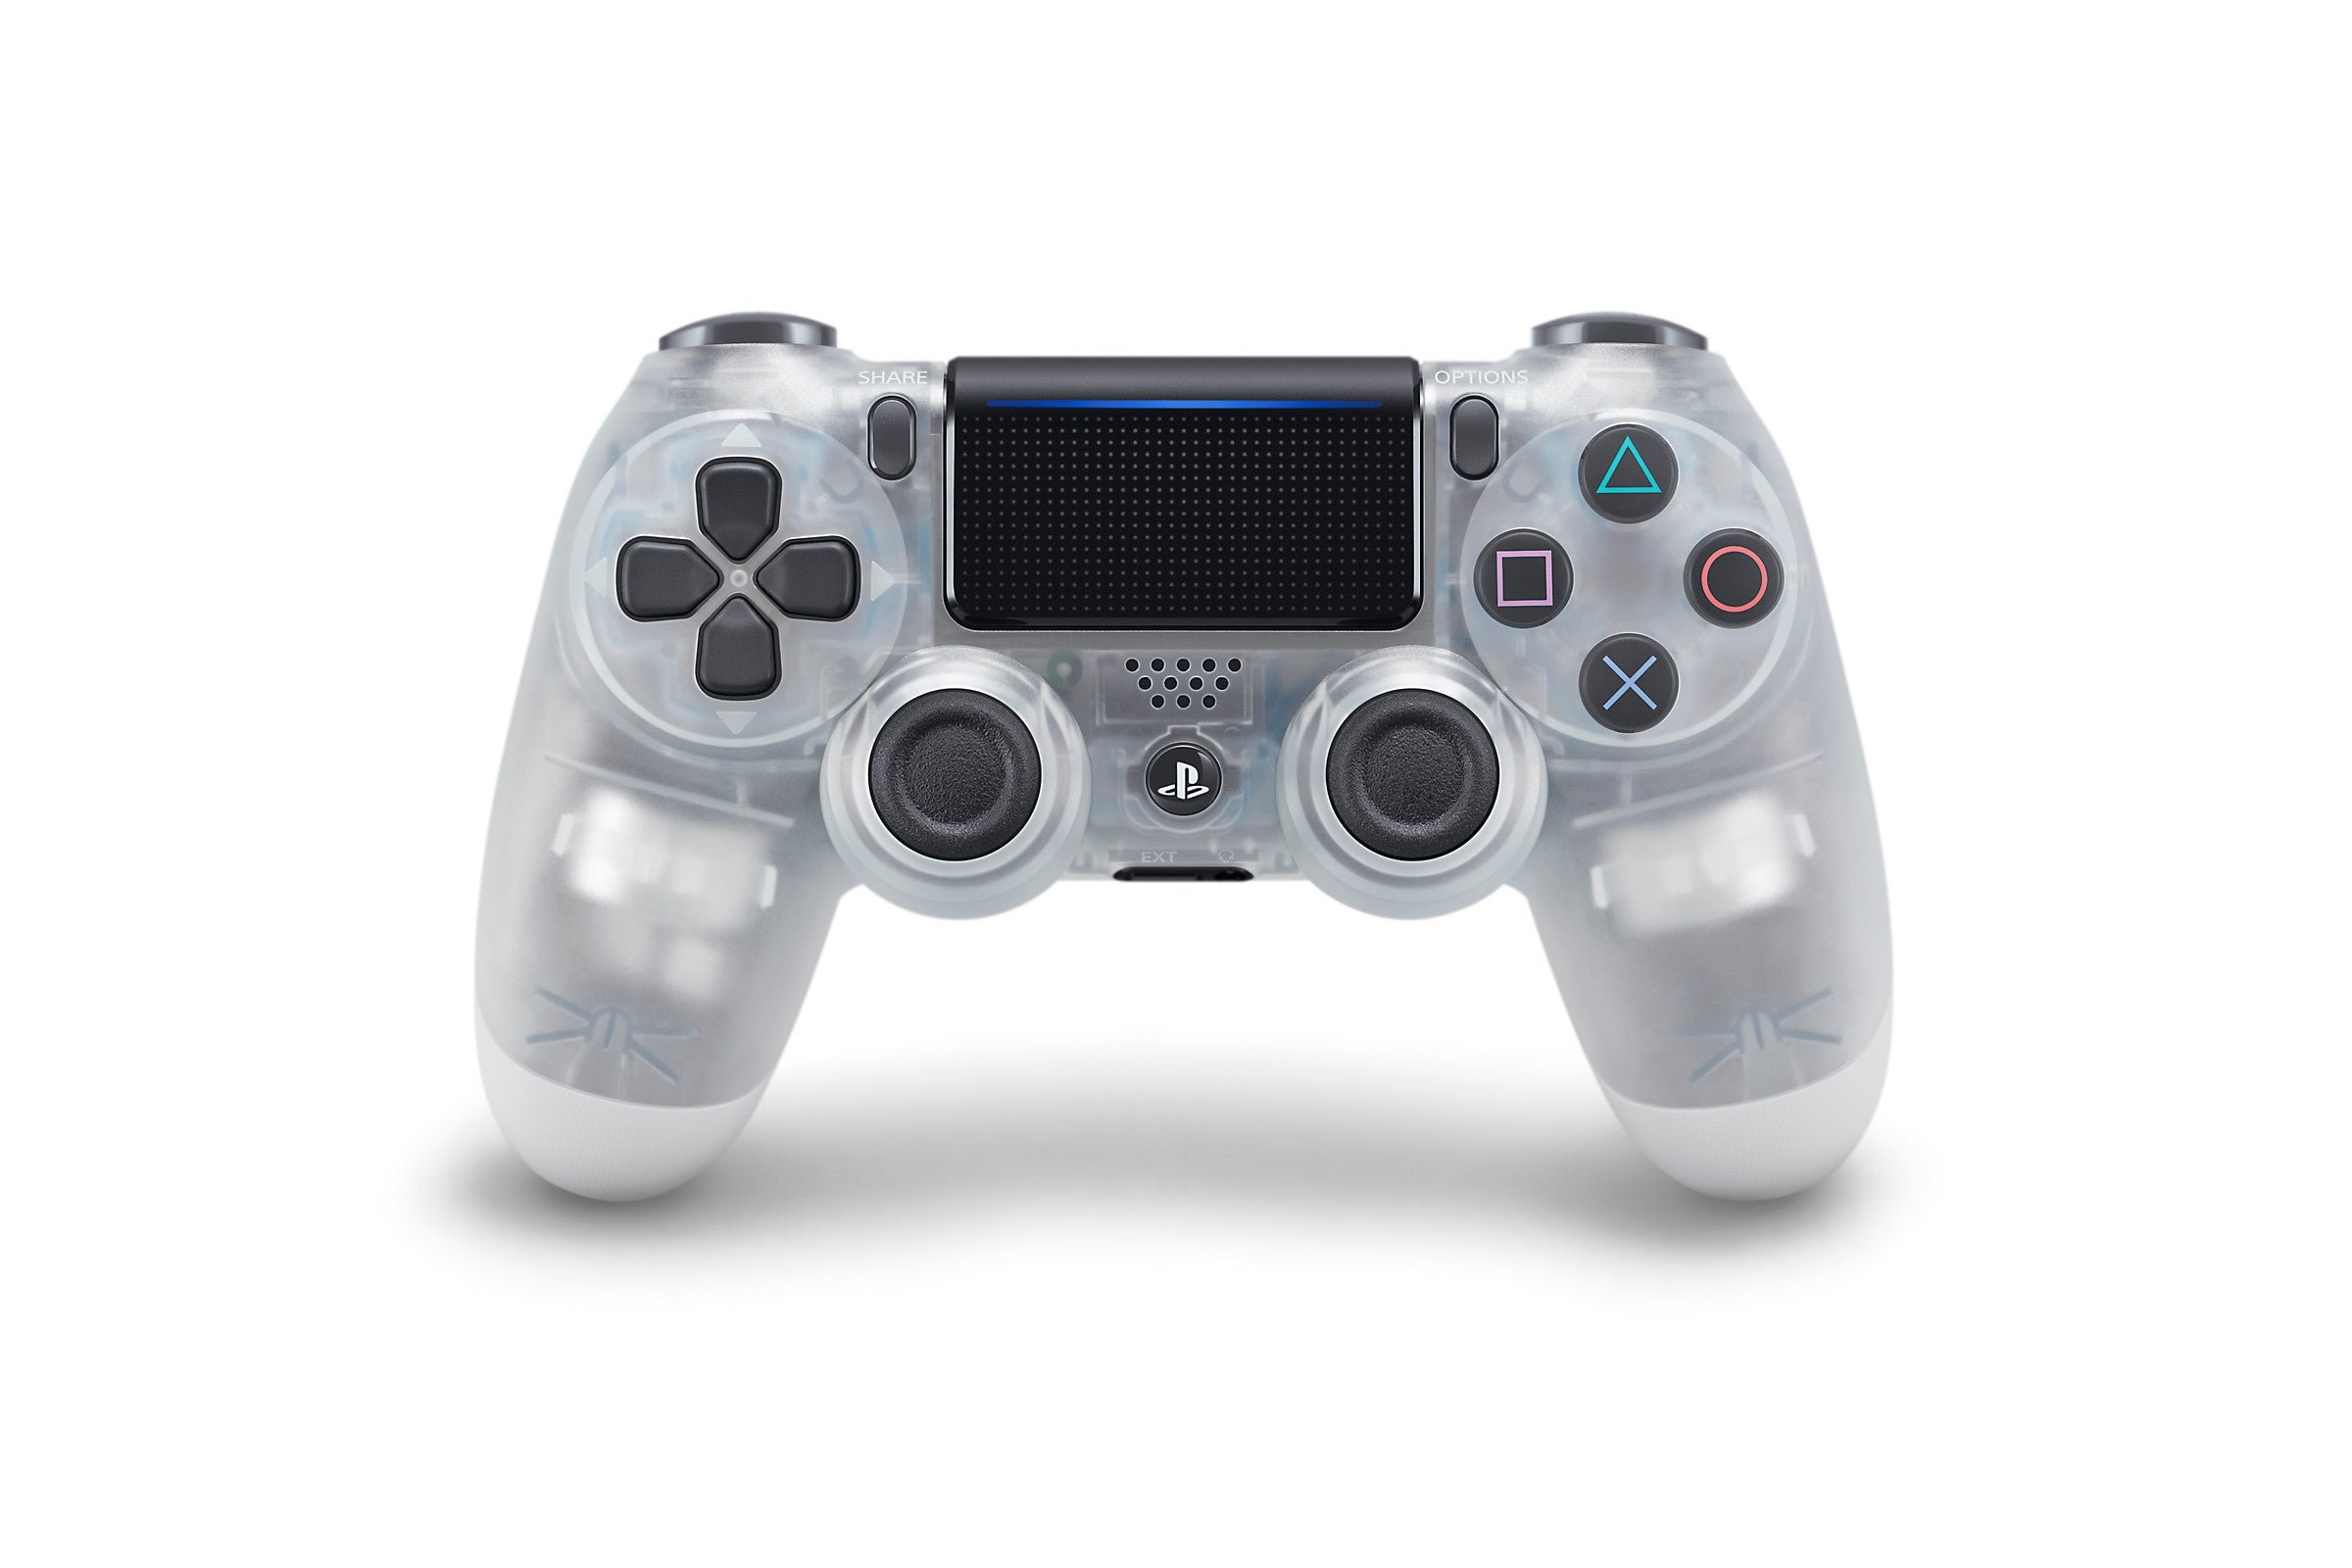 Sony DualShock 4 Wireless Controller for PlayStation 4 - Crystal White New  Model freeshipping - Pro-Distributing